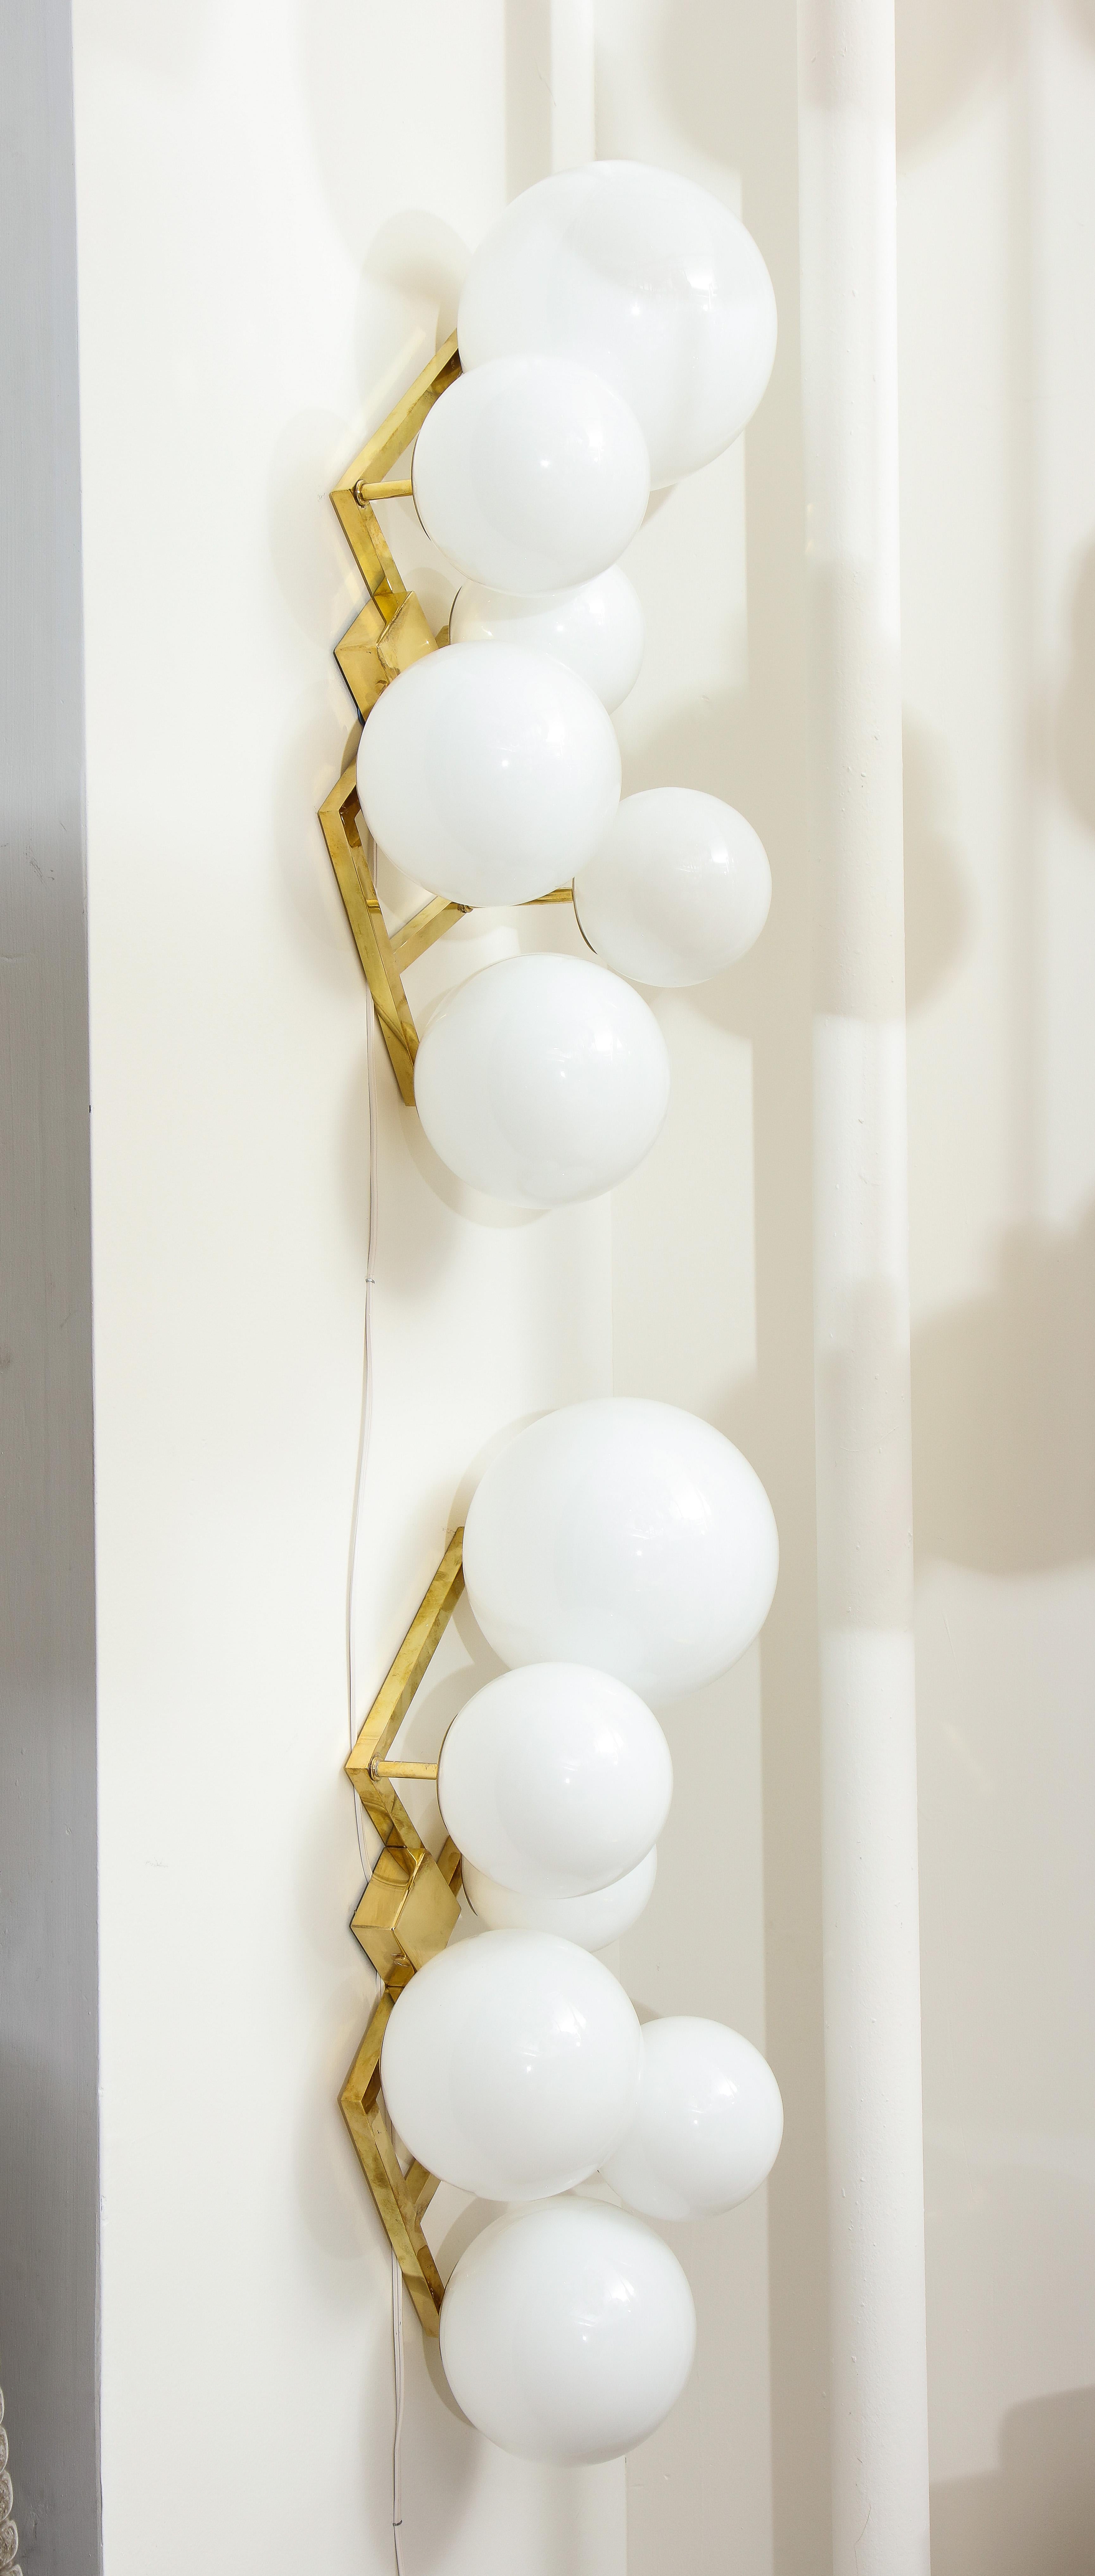 Unique pair of sconces or wall lights consisting of 6 white translucent Murano glass globes or spheres of various sizes attached in an asymmetrical pattern onto a polished brass frame. Wired for U.S. use. For purposes of display in our showroom, we